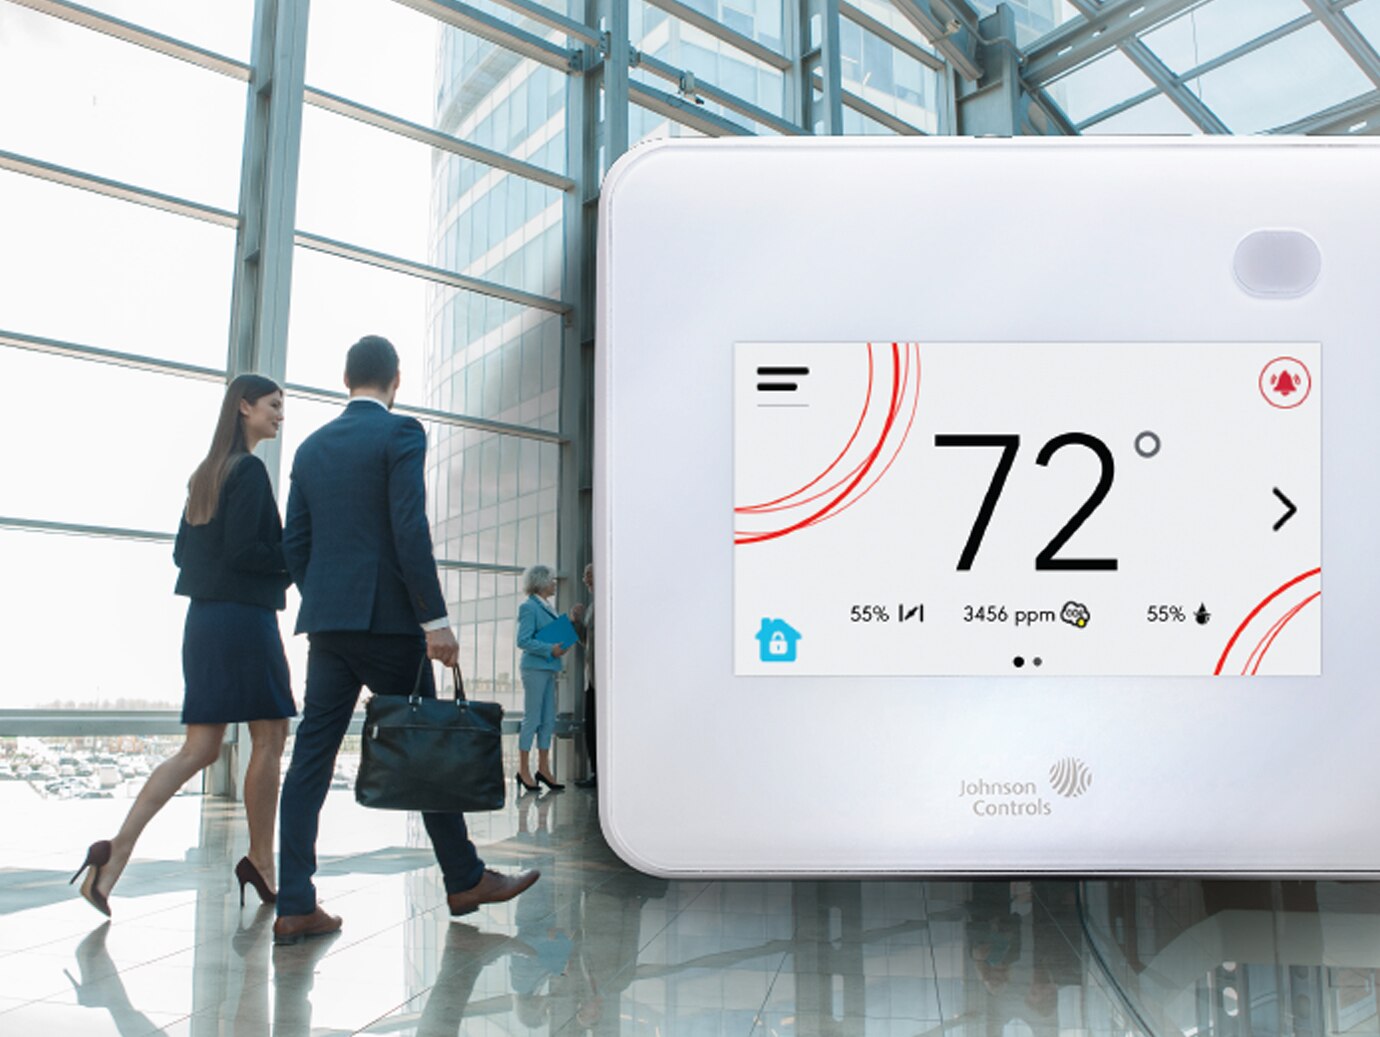 Interior of a busy airport, with a close-up of a networked thermostat overlaid in the foreground